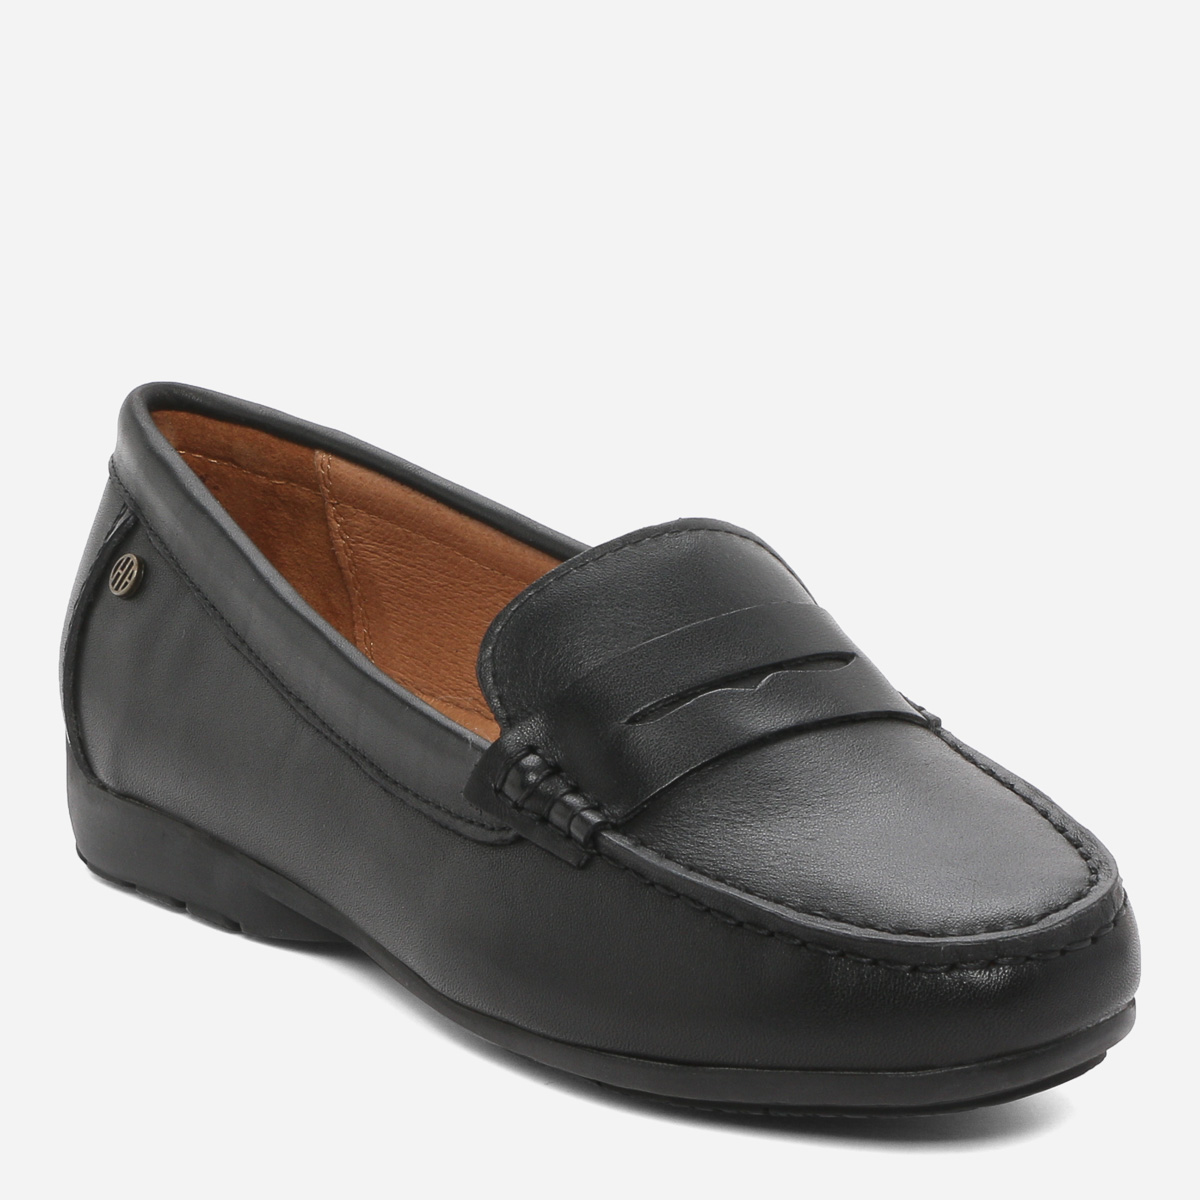 hush puppies ladies loafers